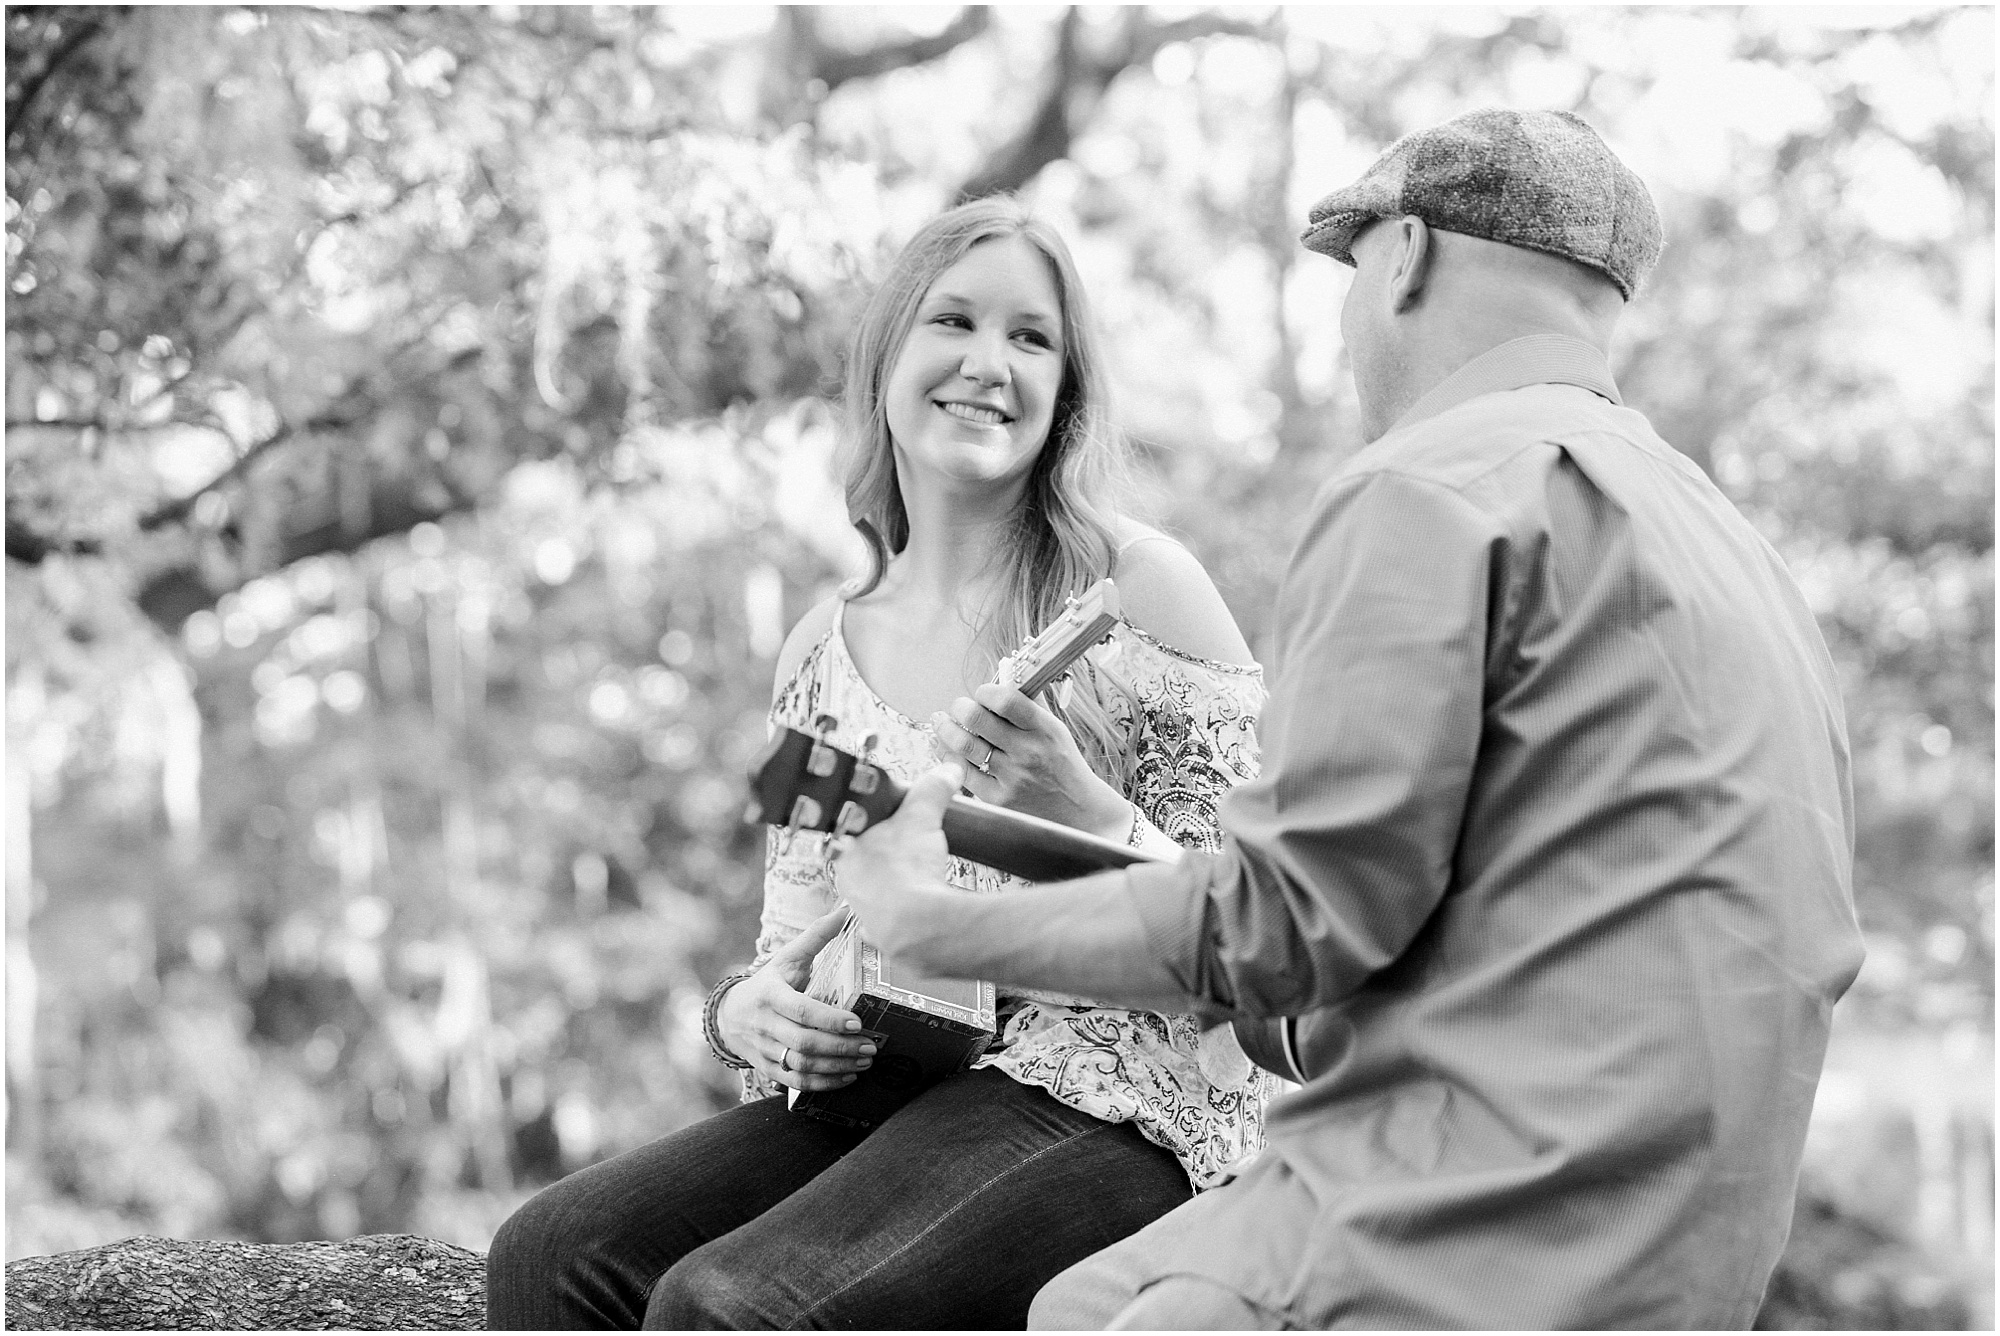 Woman looking at guy while he is playing the guitar in a tree outdoors.